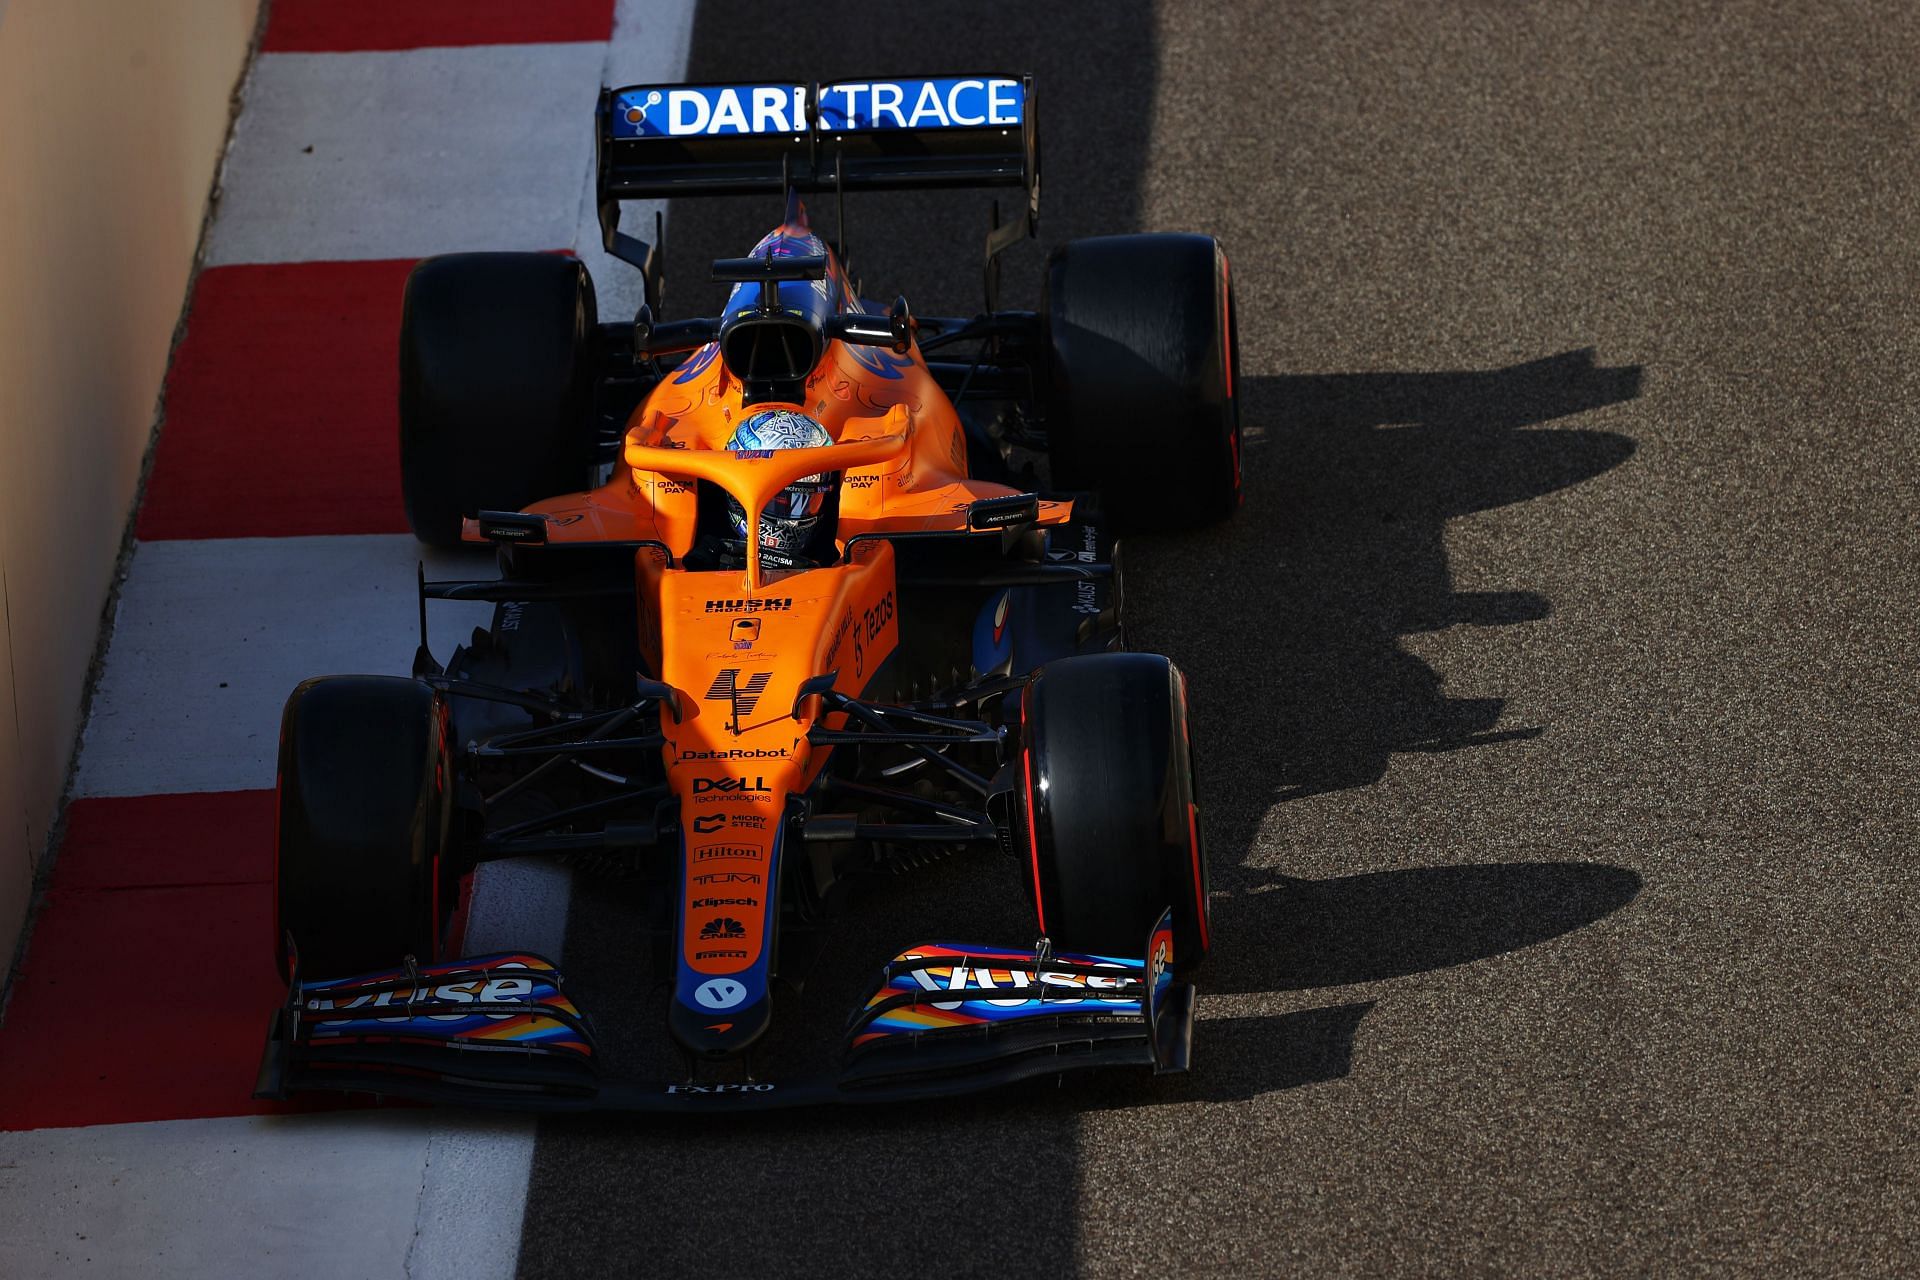 McLaren&#039;s Lando Norris in action at the 2021 Abu Dhabi Grand Prix (Photo by Clive Rose/Getty Images)